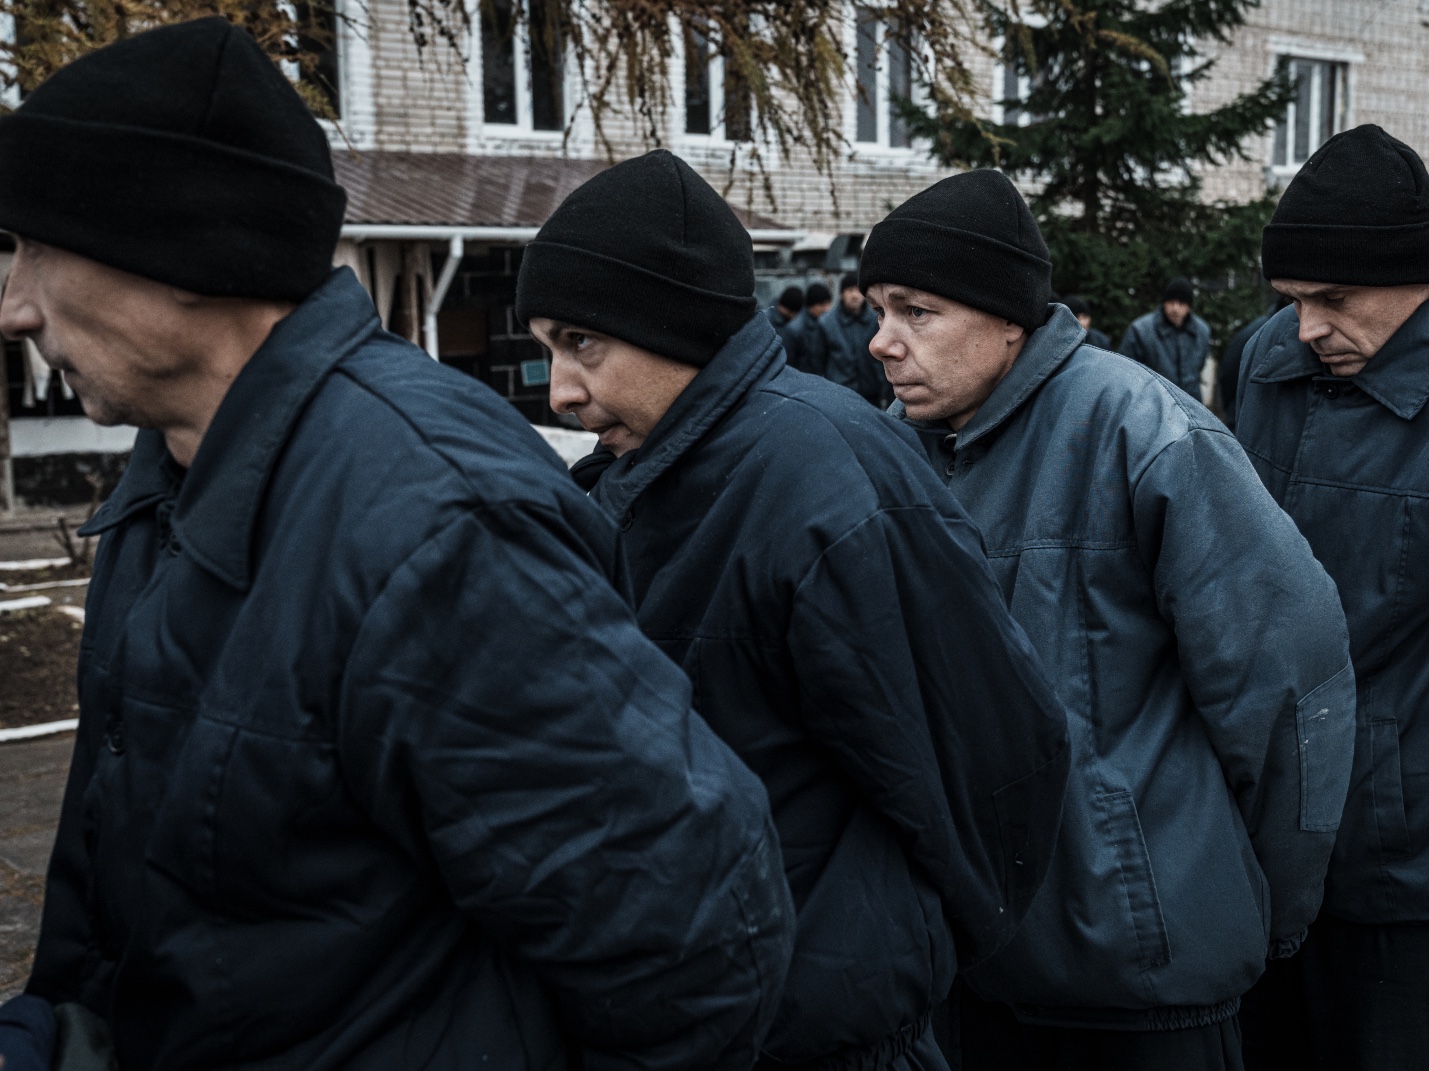 WESTERN UKRAINE - DECEMBER 2: Russian prisoners of war walk in a line through the territory of a prison on December 2, 2022 in Western Ukraine. Russian military personnel who were captured in Ukrainian territory are taken care of by the Coordination Headquarters for the Treatment of Prisoners of War. Thus, in the camp for Russian prisoners of war in the west of Ukraine, all the necessary conditions of stay in accordance with international conventions have been created - three meals a day, the opportunity to visit the church, an equipped bomb shelter, a medical block with a dental and X-ray room, a shower, a recreation room, a TV and the ability to call relatives via the Internet. Prisoners of war are involved in simple productions - gluing gift packages or chopping wood chips for kindling, for which they receive money in accordance with the Geneva Convention. (Photo by Serhii Mykhalchuk/Global Images Ukraine via Getty Images)